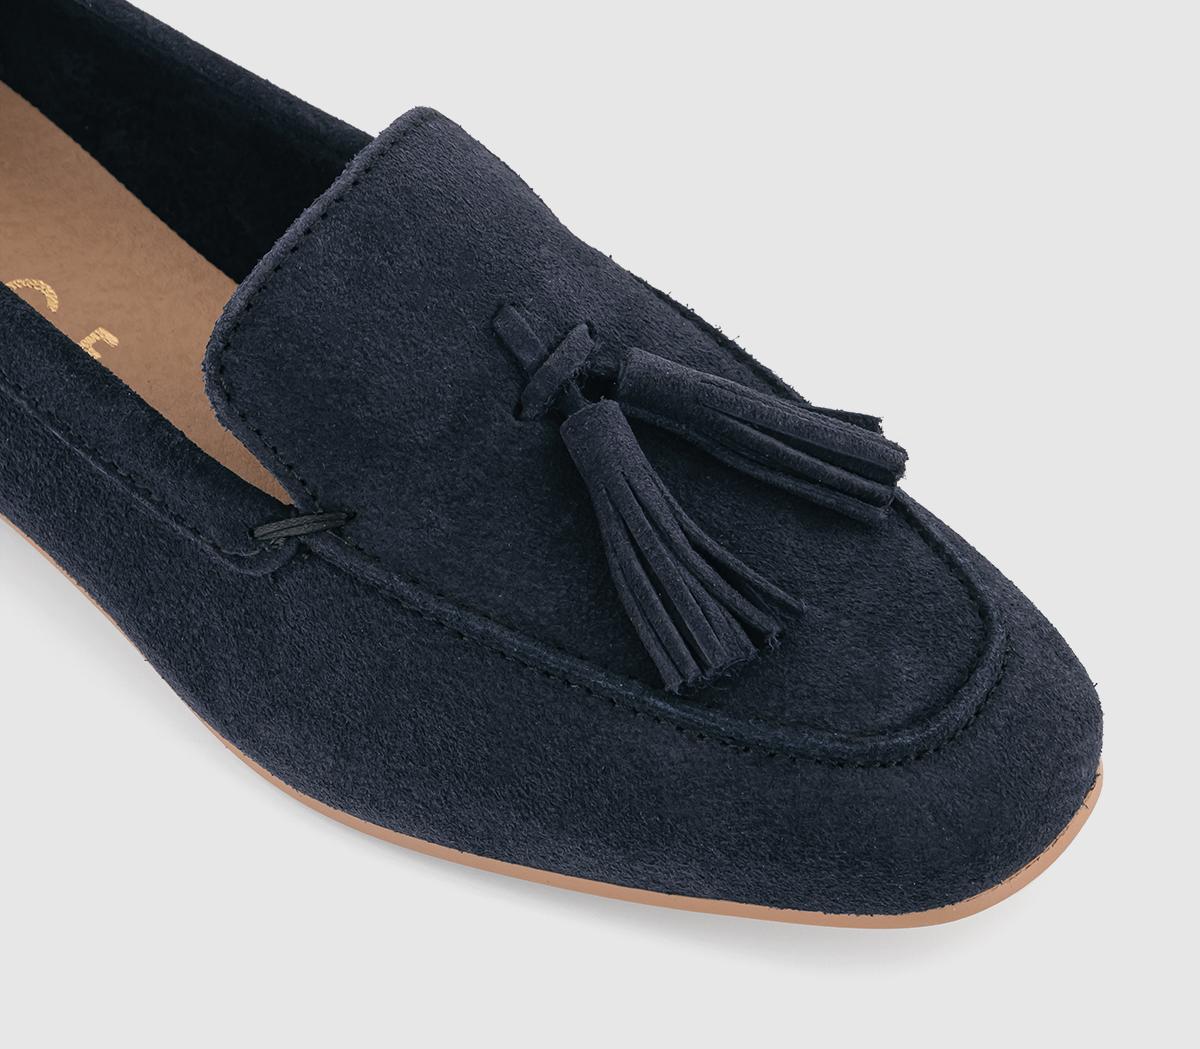 OFFICE Fond Tassel Loafers Navy Suede - Flat Shoes for Women